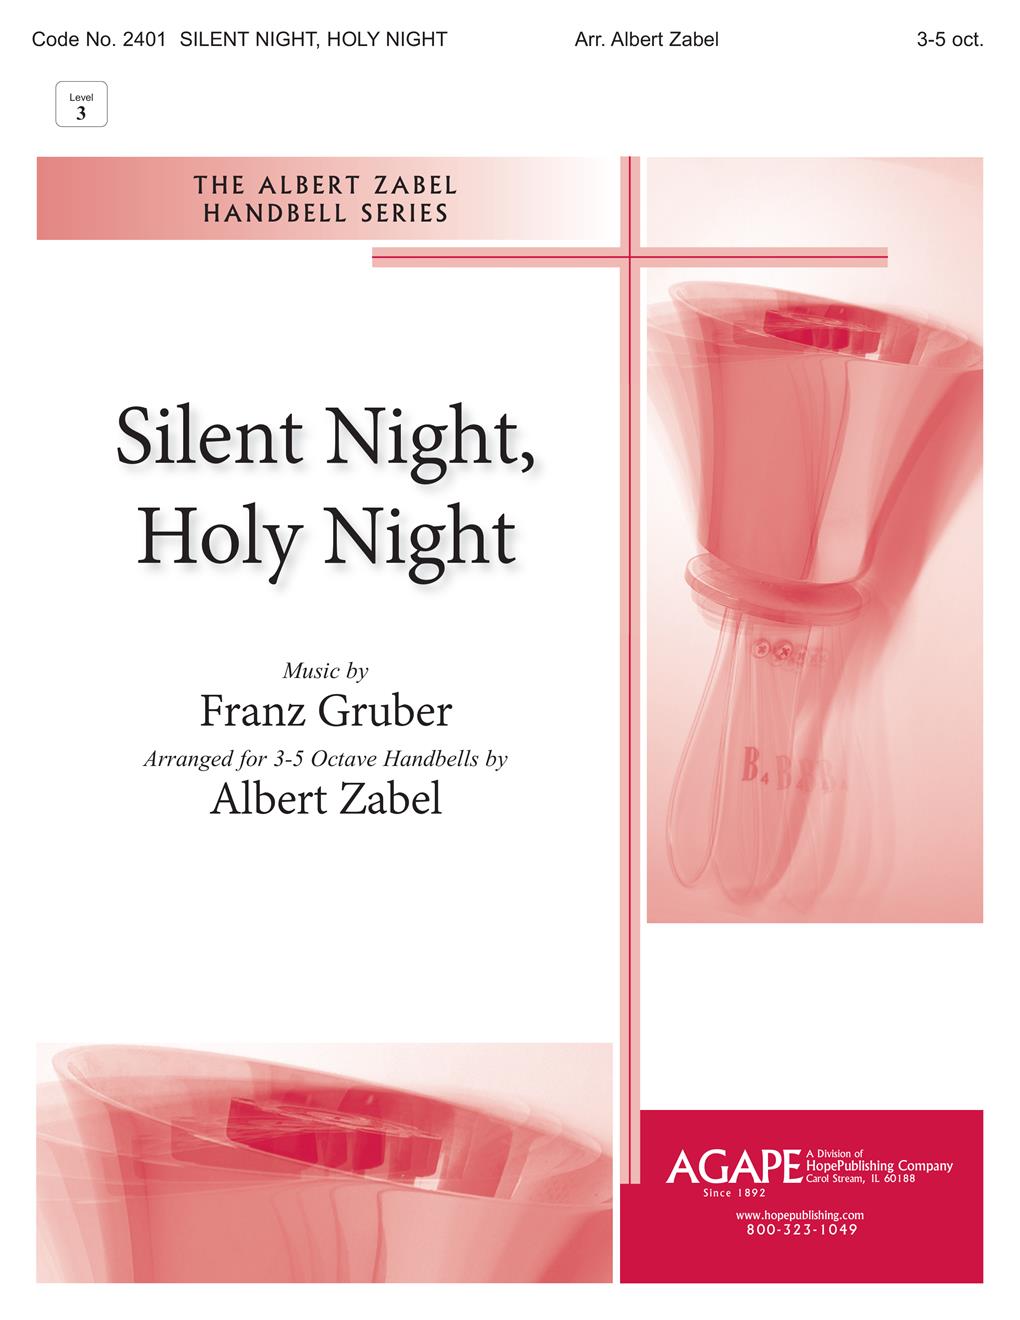 Silent Night Holy Night - 3-5 Oct. Cover Image